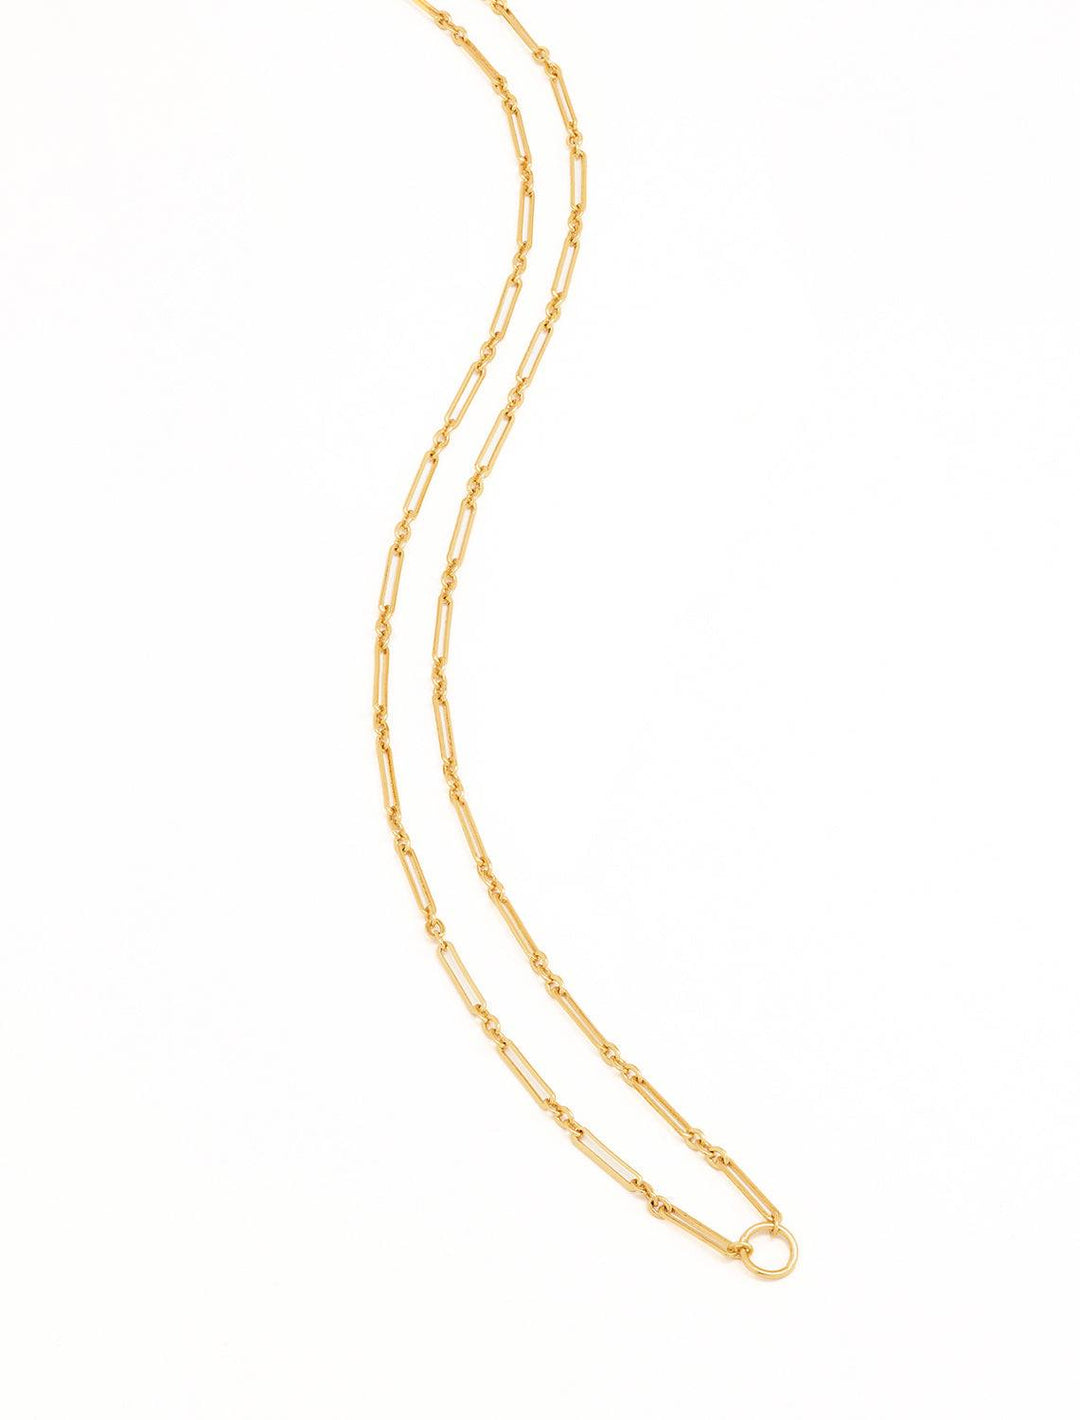 Stylized laydown of Clare V.'s paperclip chain necklace in vintage gold.